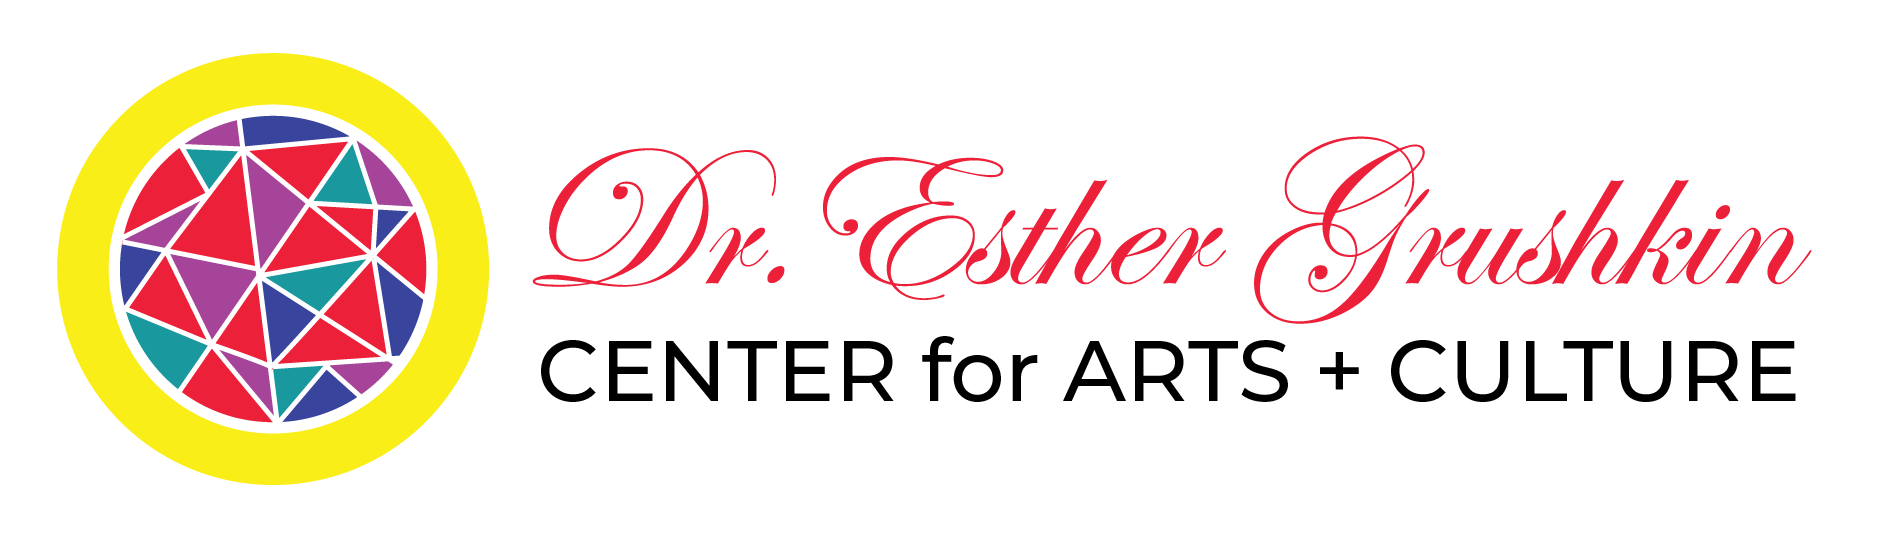 Dr. Esther Grushkin Center for Arts and Culture - logo